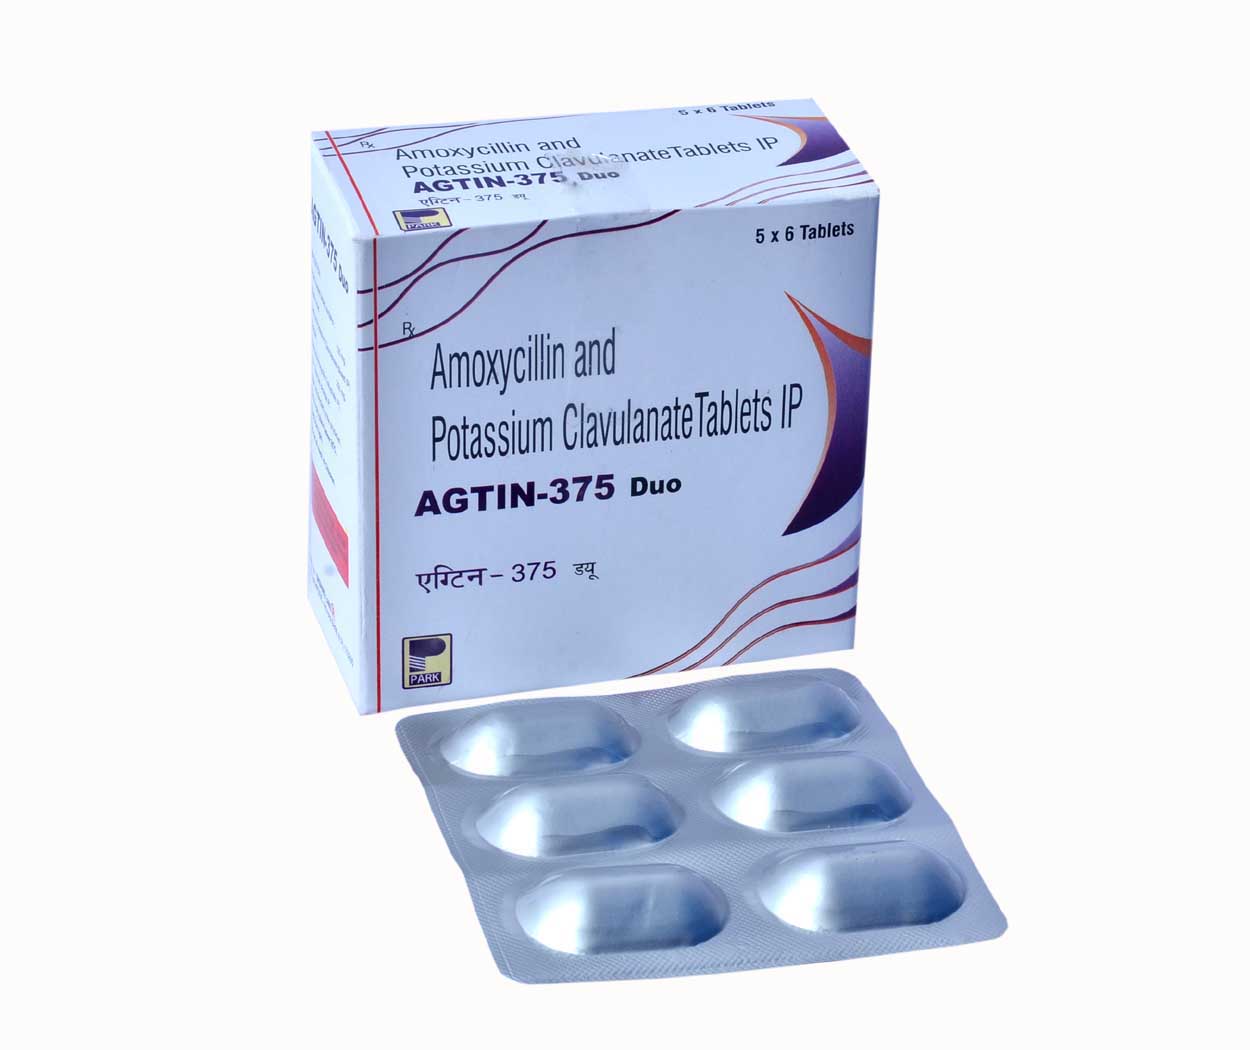 Product Name: AGTIN 375 Duo, Compositions of AGTIN 375 Duo are Amoxycillin and Potassium Clavulanate Tablets IP - Park Pharmaceuticals